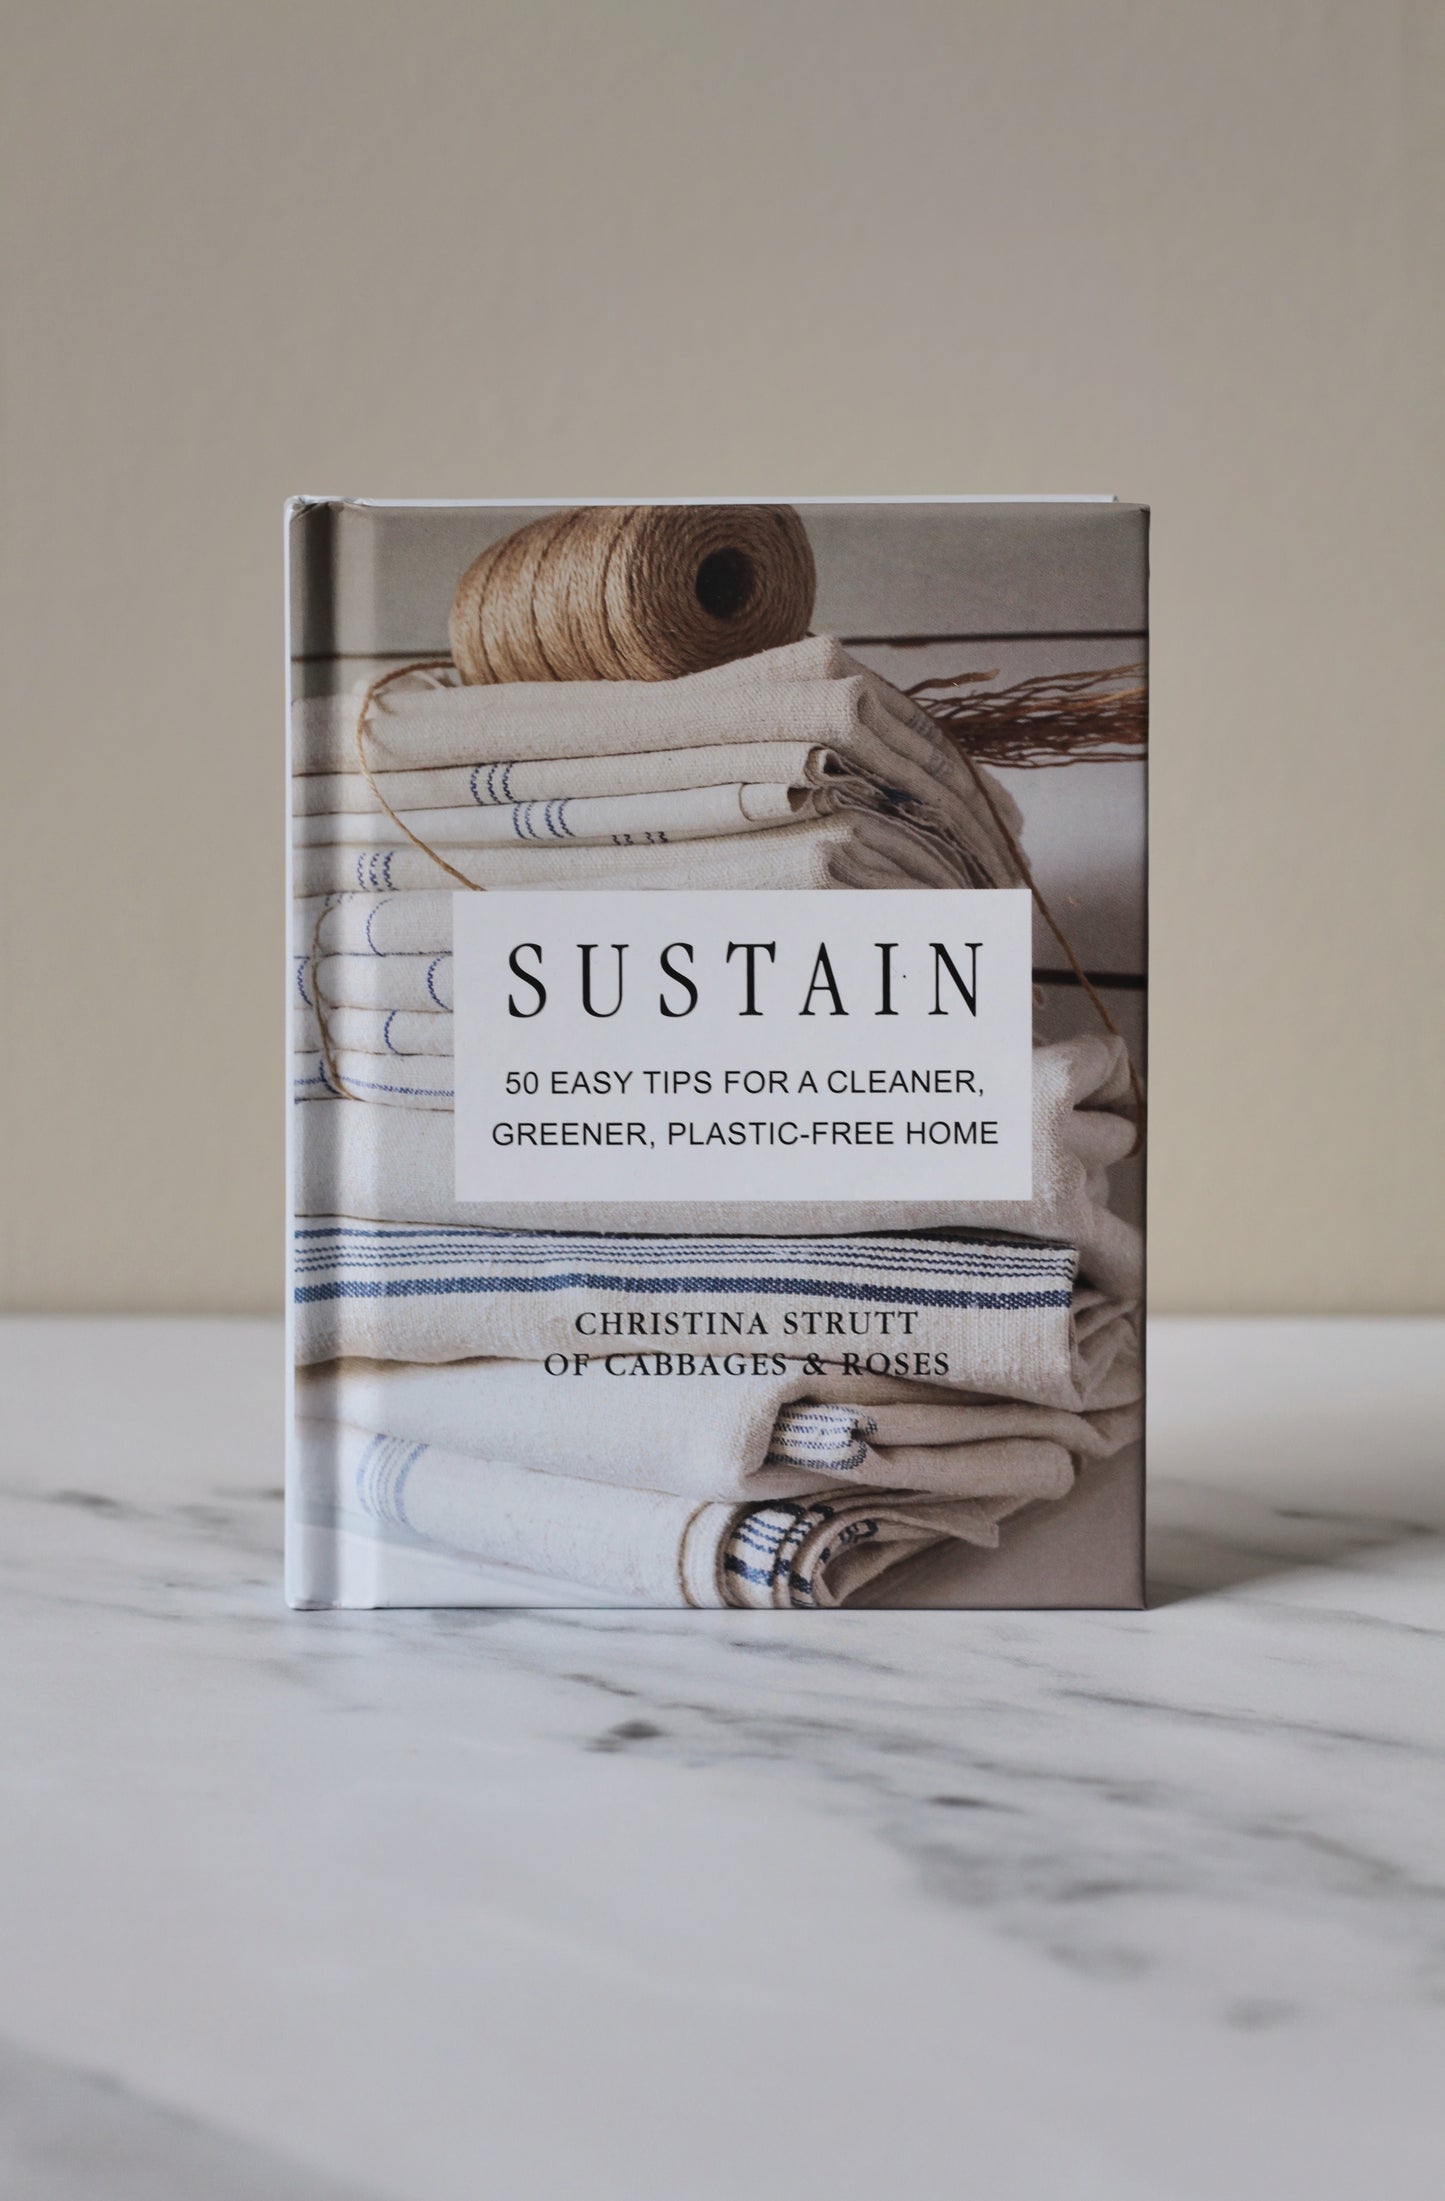 Sustain book with tips on how to live a greener life by Christina Strutt of Cabbages and Roses